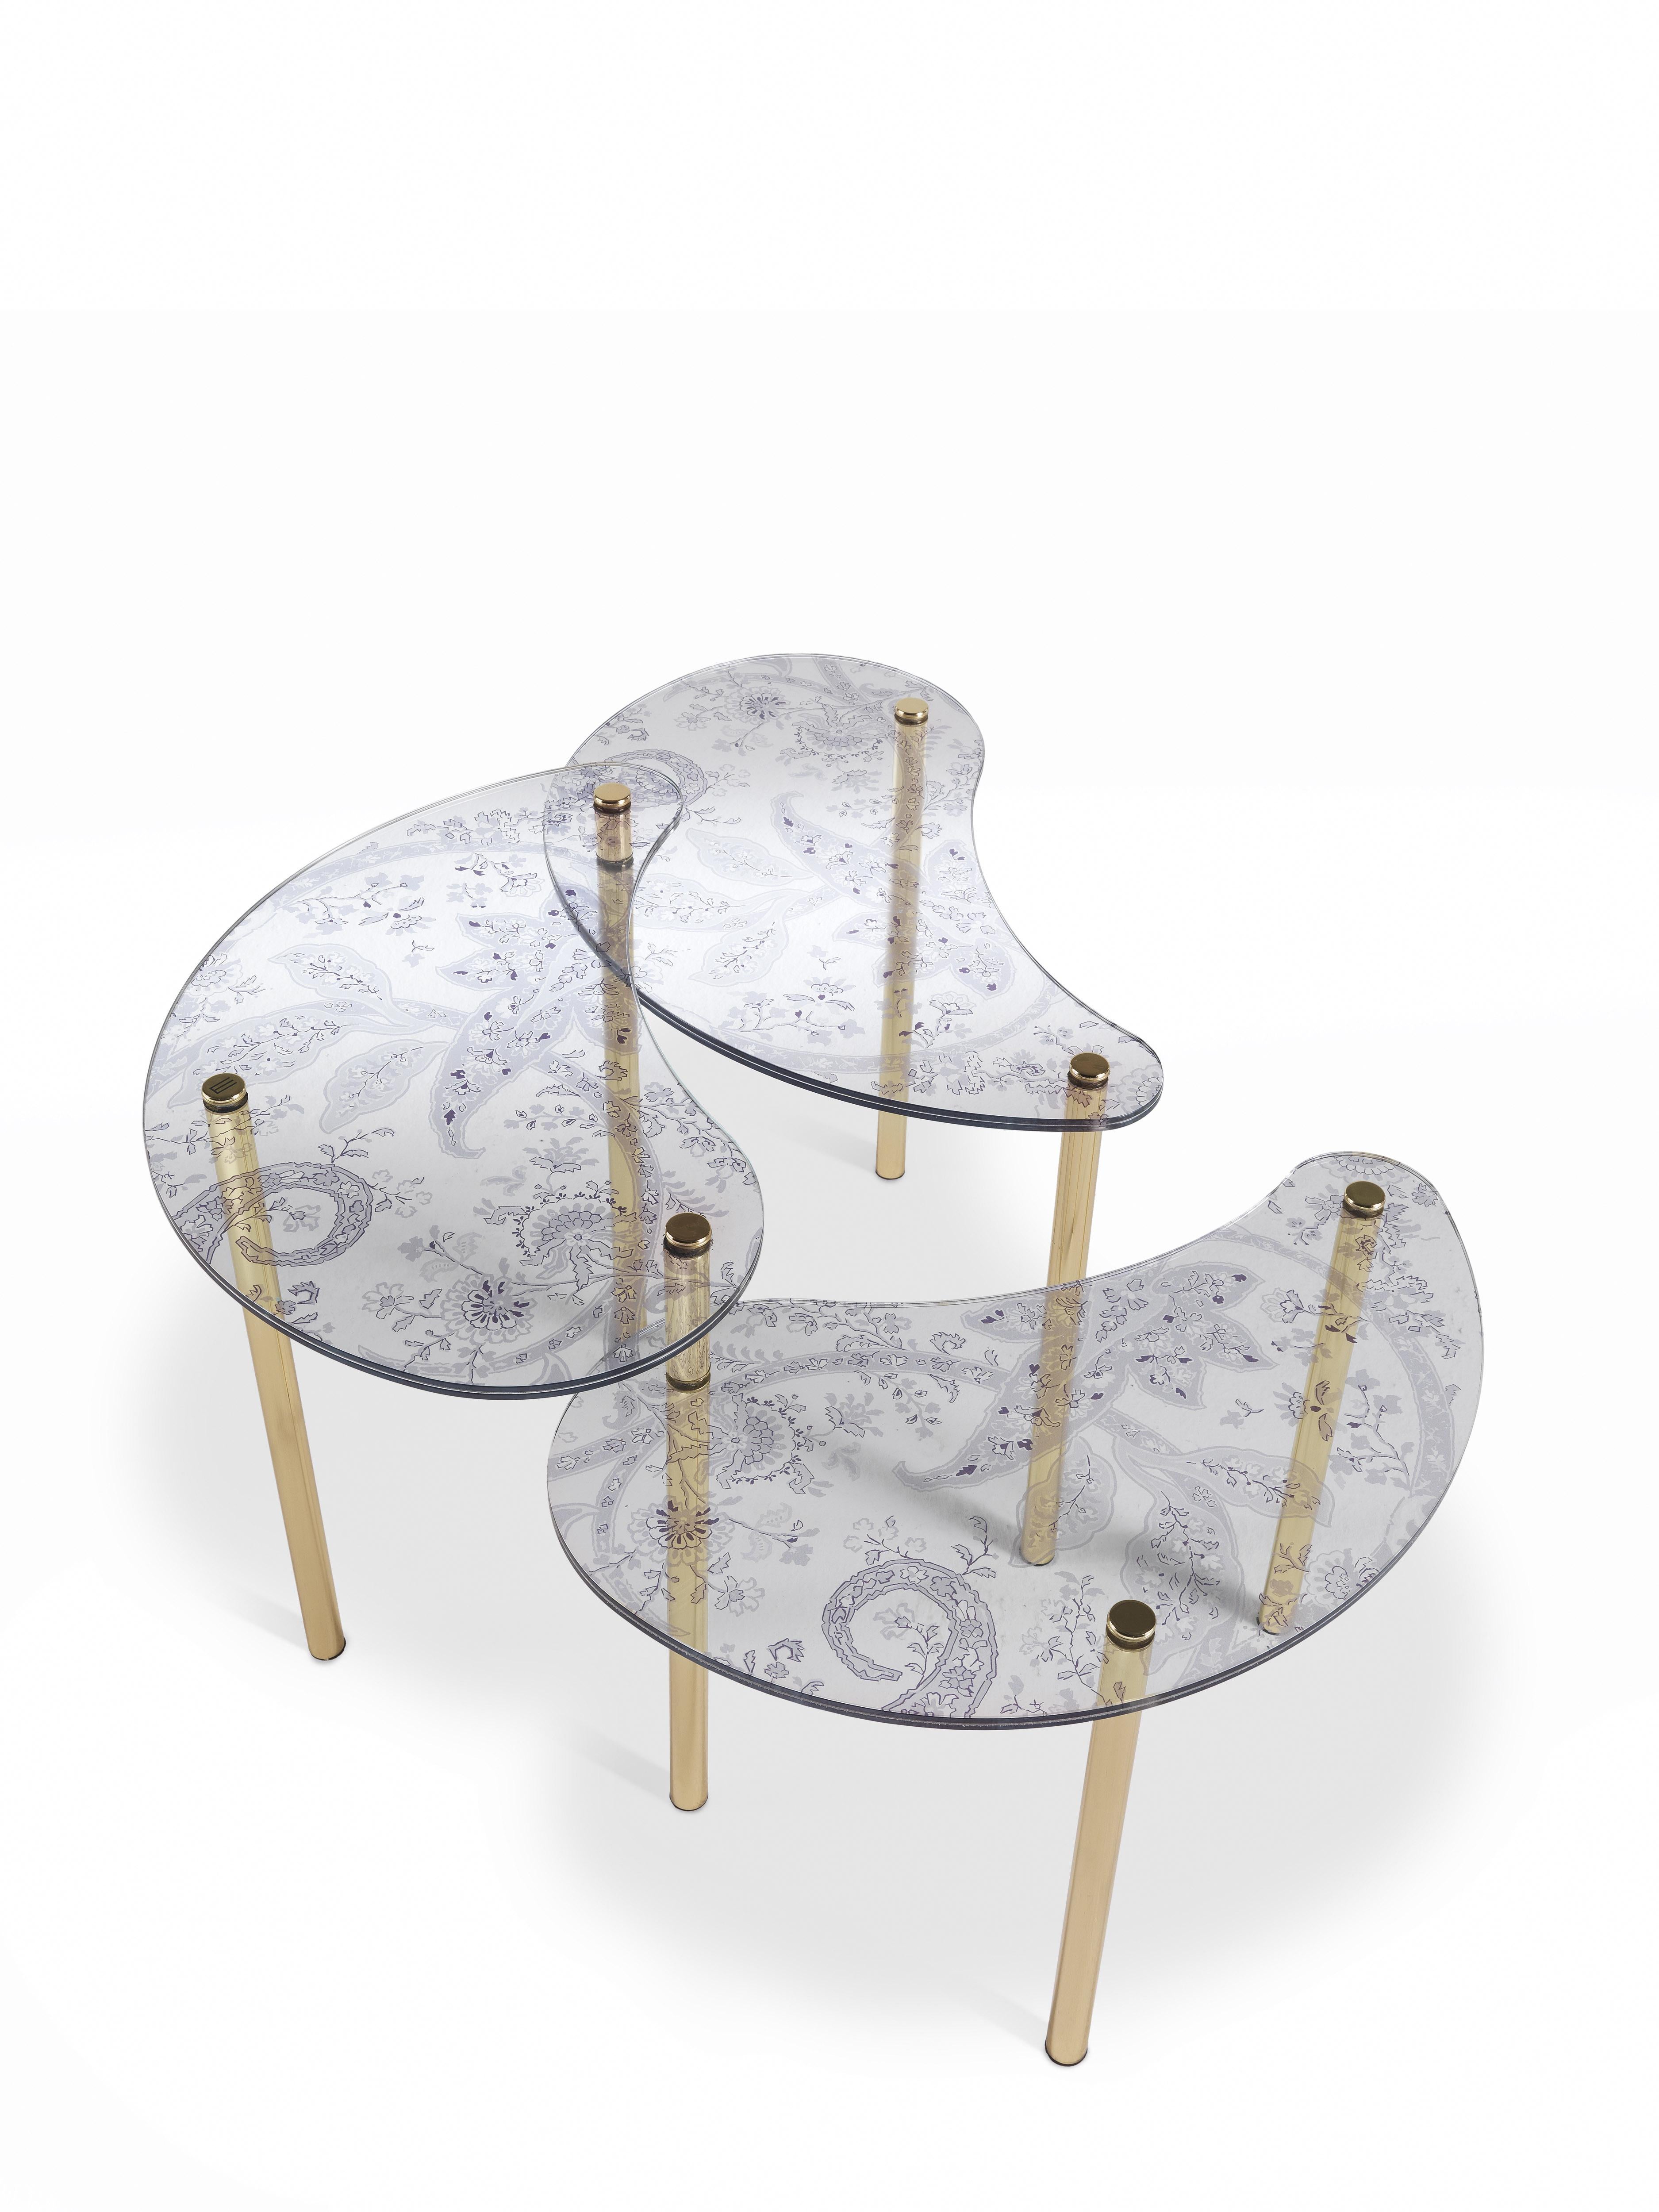 Italian 21st Century Krishna Small Table in Glass and Brass by Etro Home Interiors